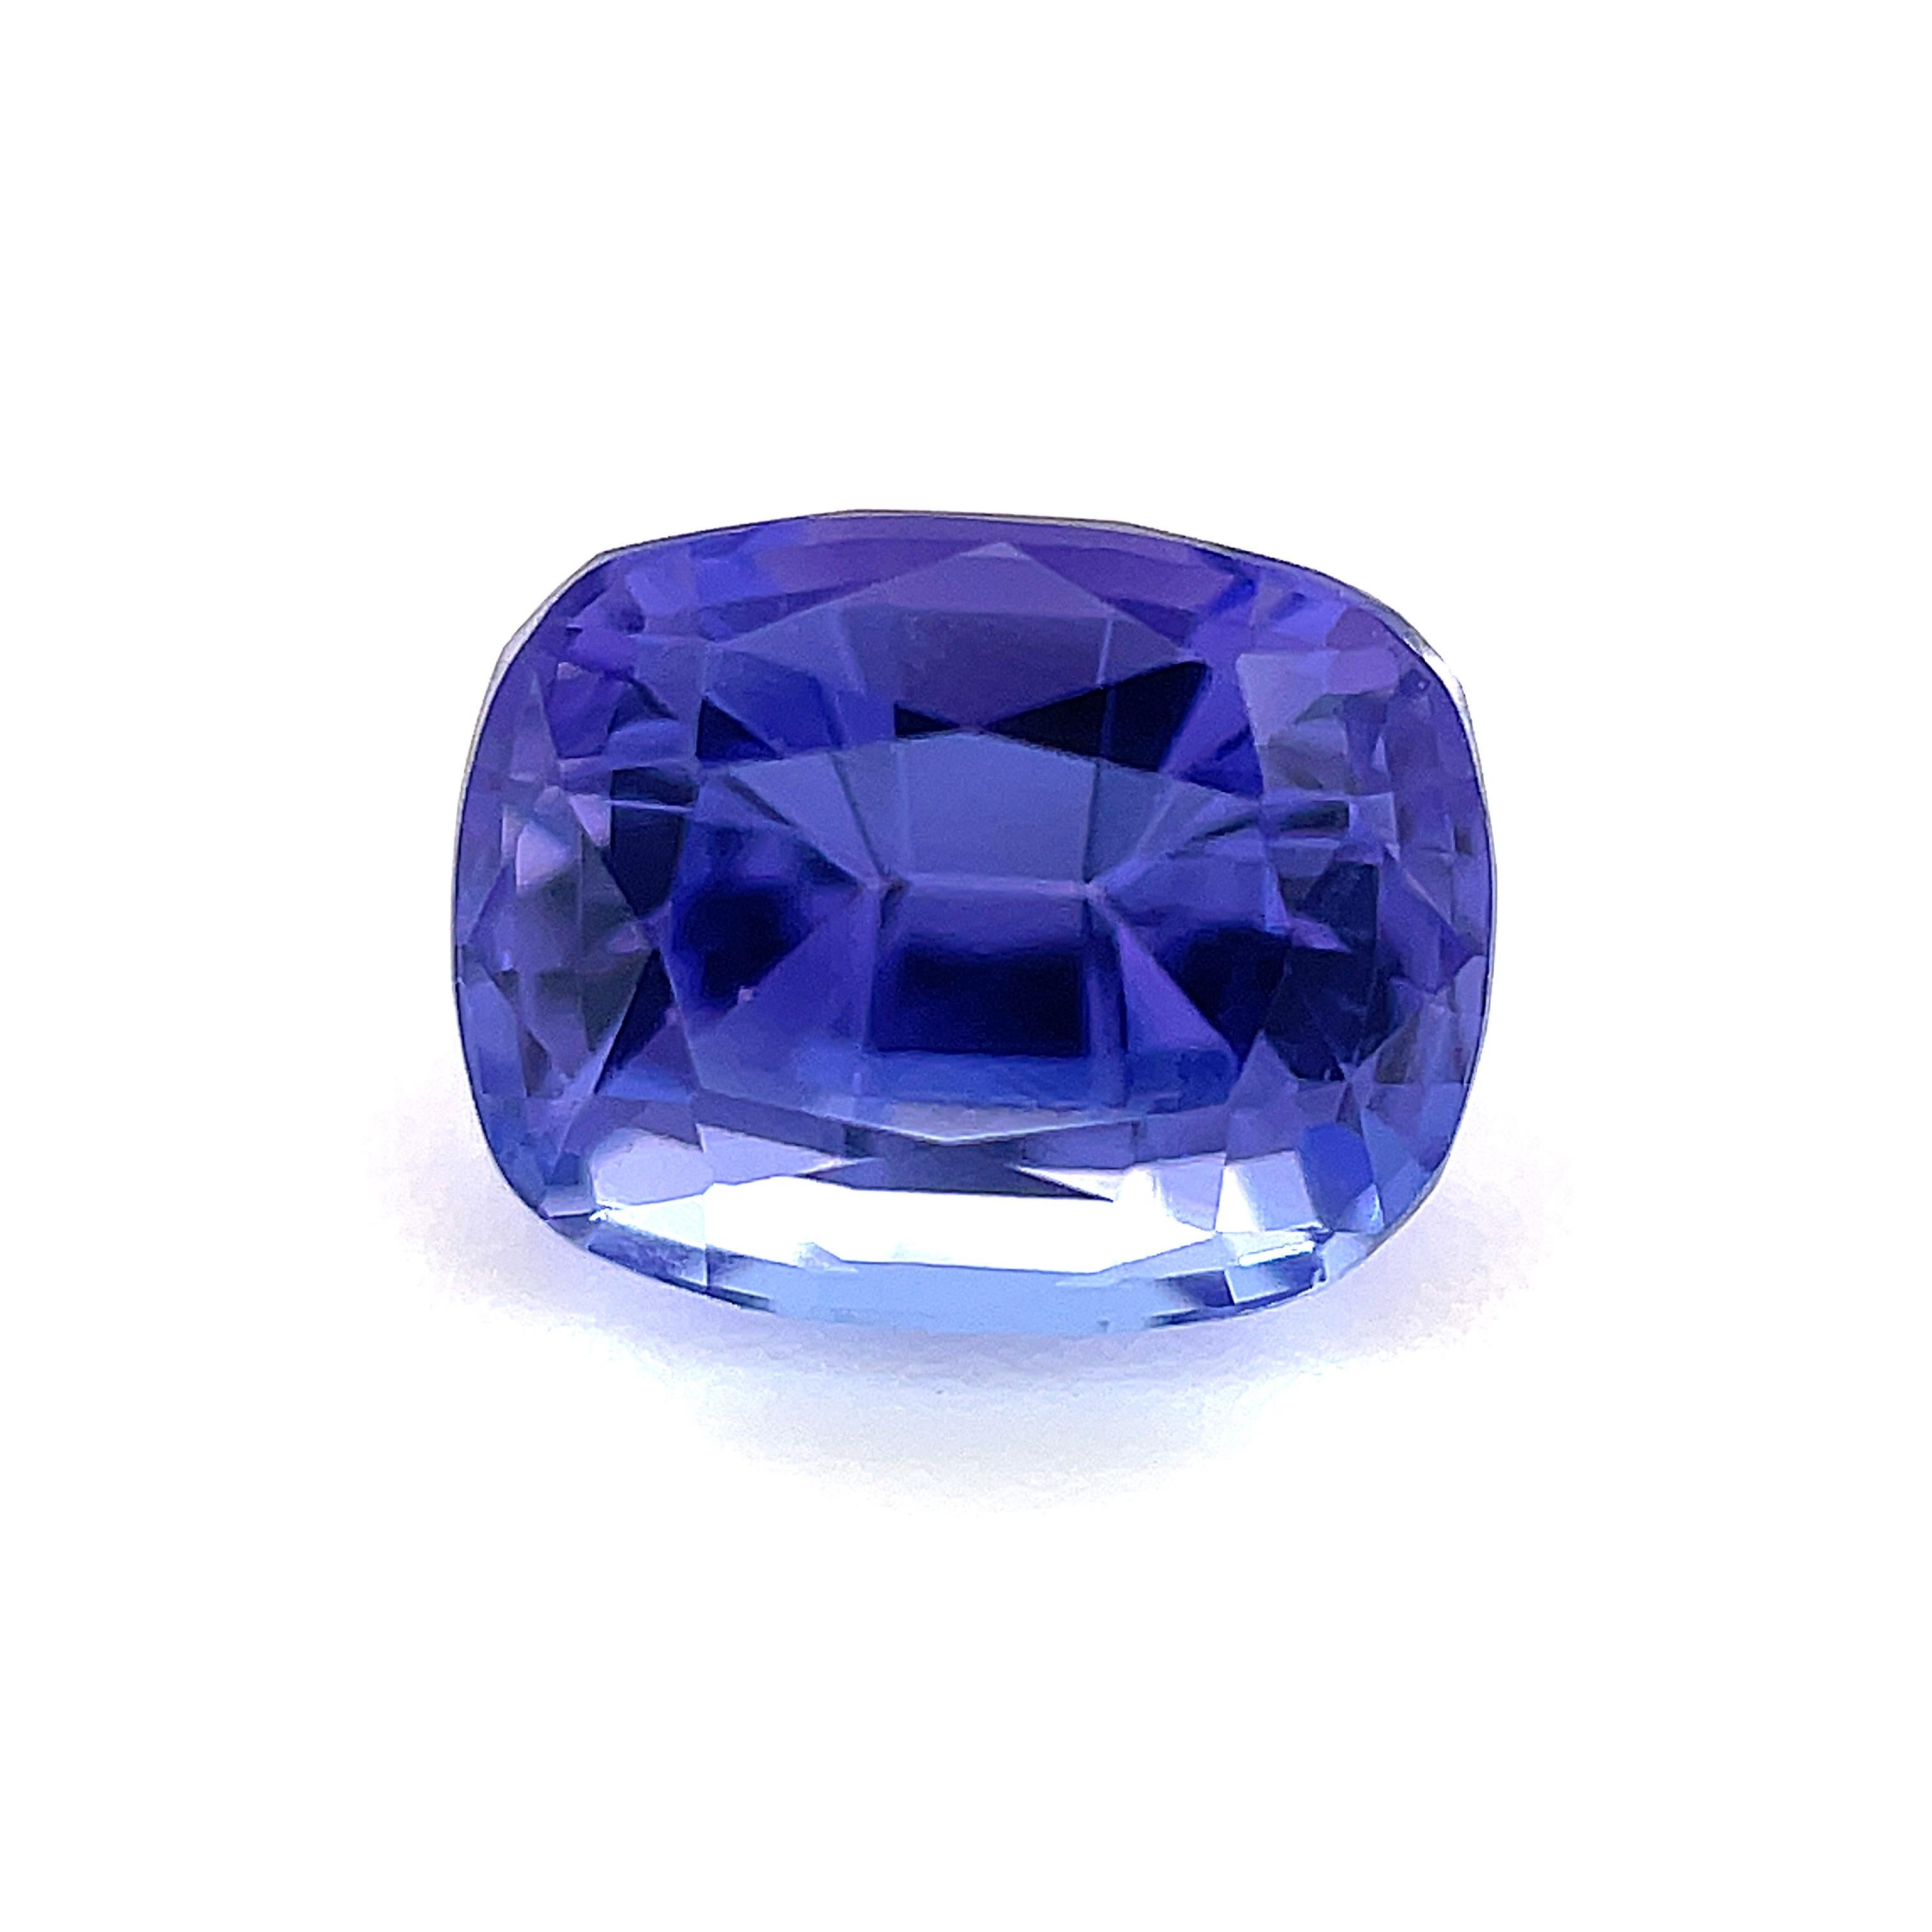 This petite tanzanite gemstone is both gorgeous and budget-friendly! With its characteristic balance of rich blue and purple, this is unmistakeable as the highly-prized African gem from Tanzania. It has beautifully saturated color, especially for a